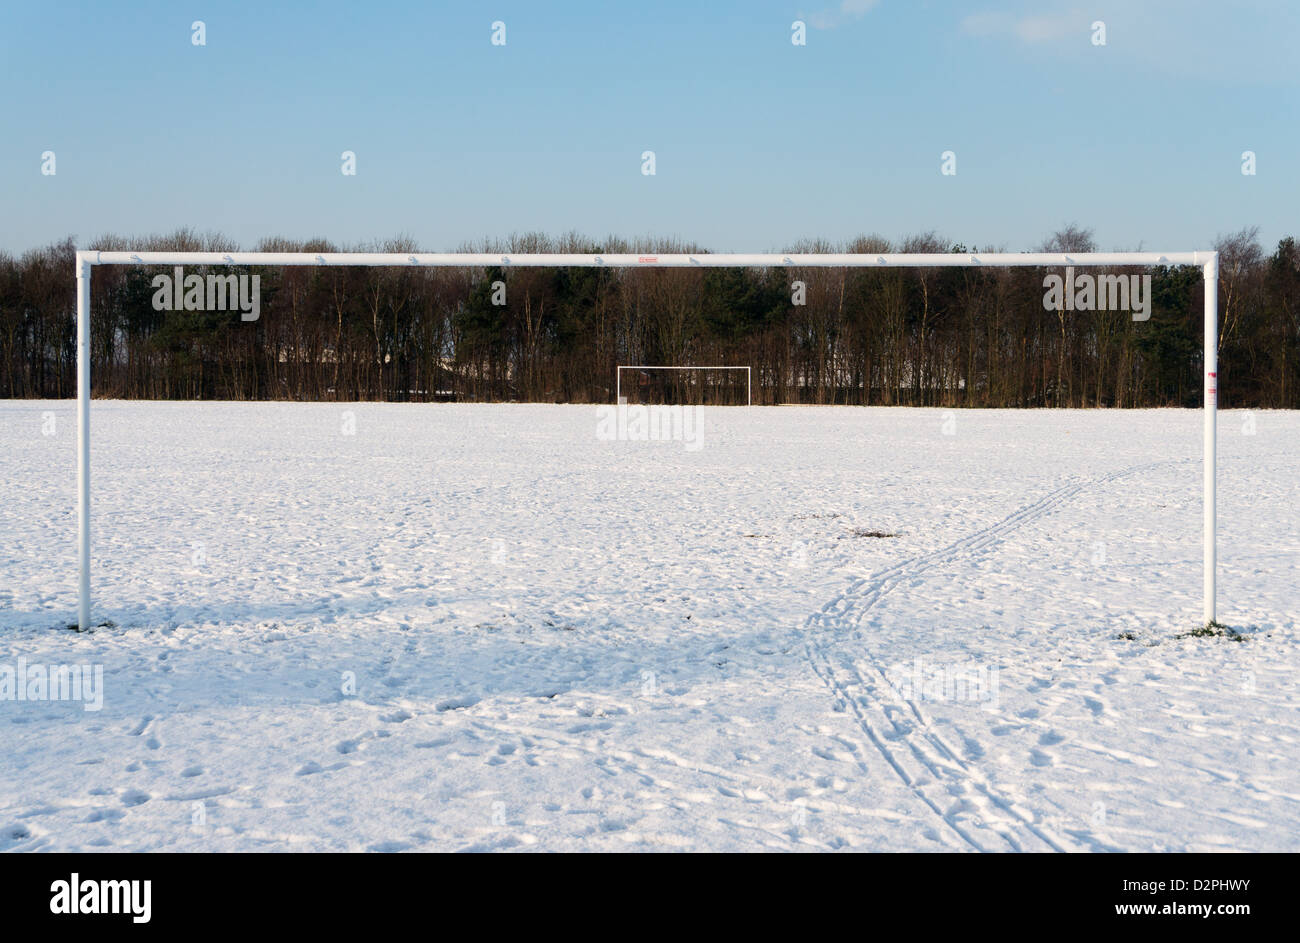 Snow covered football pitch north east England UK Stock Photo